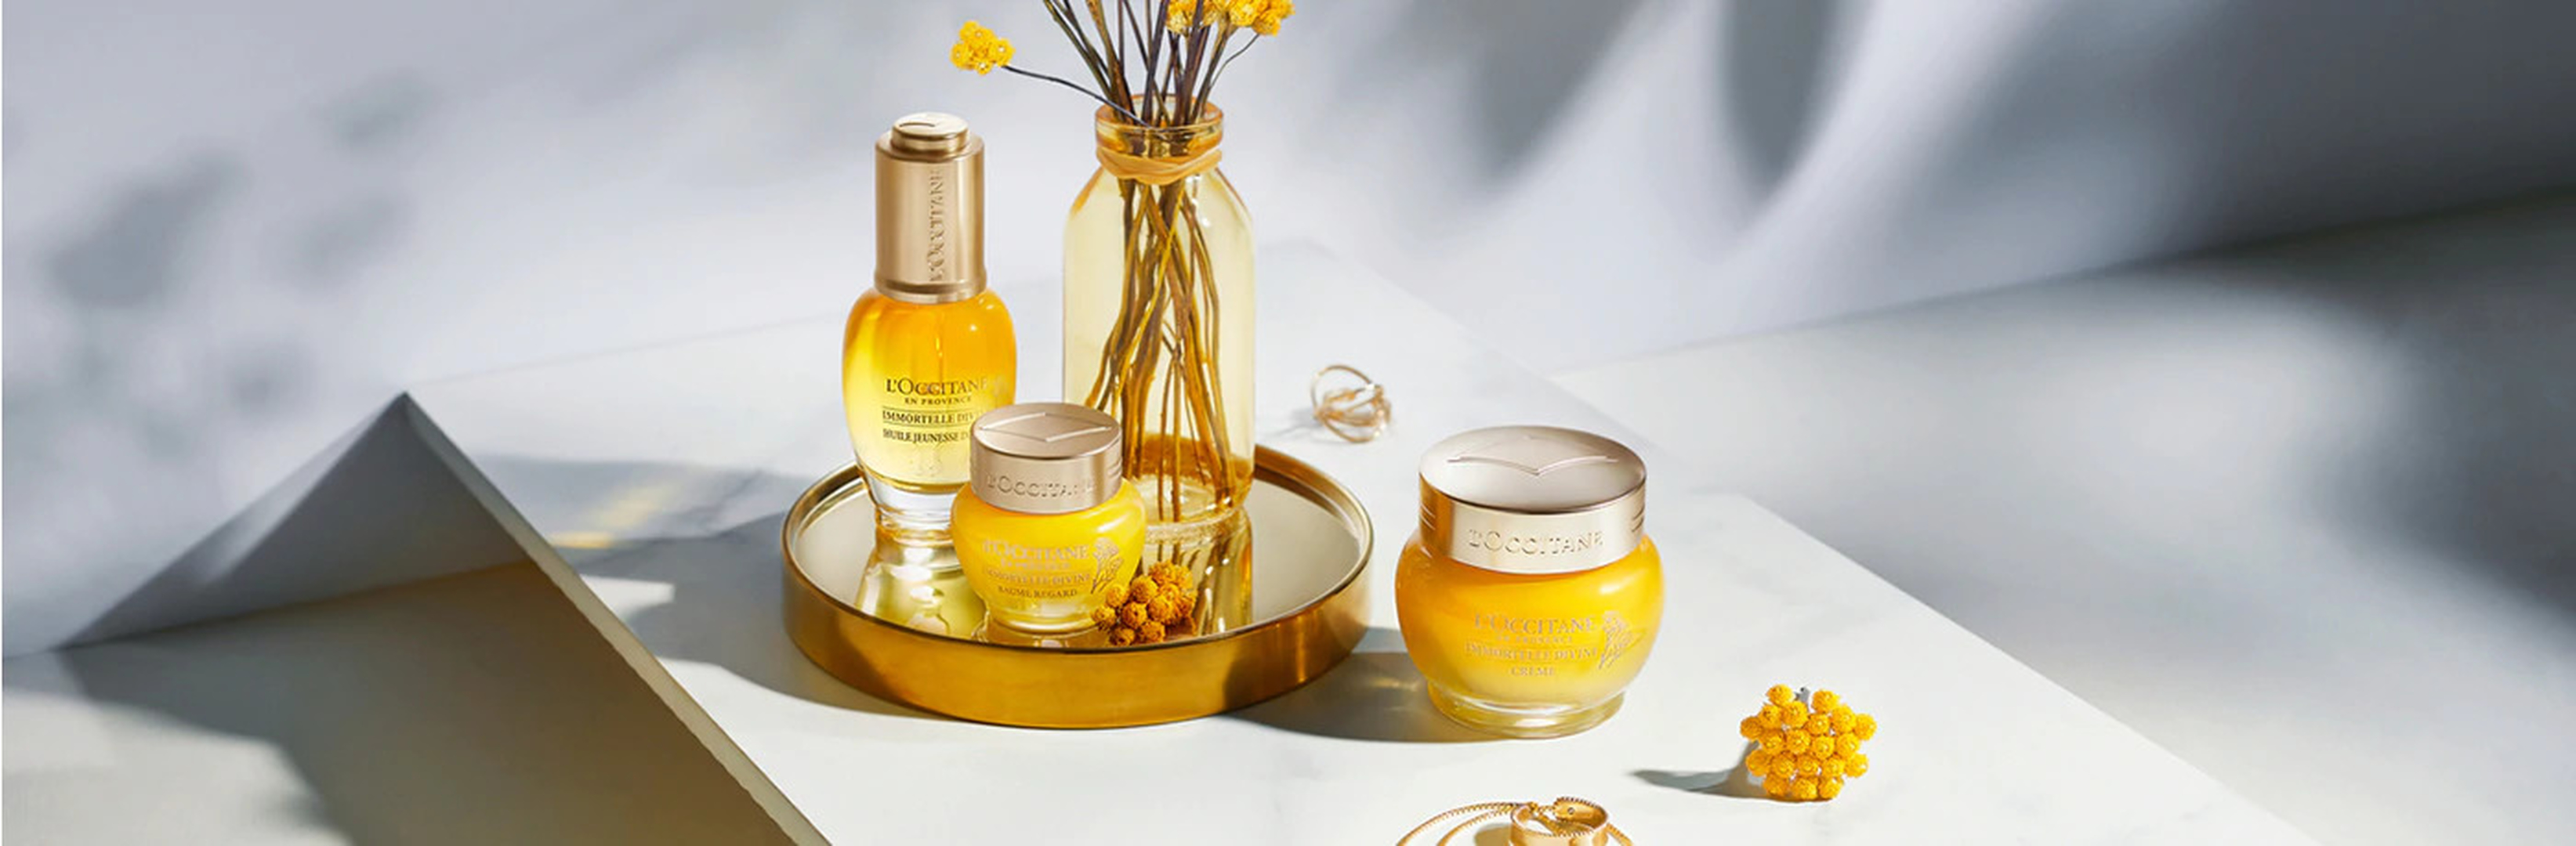 L'Occitane - transported to Provence for its aromas and texture image-0